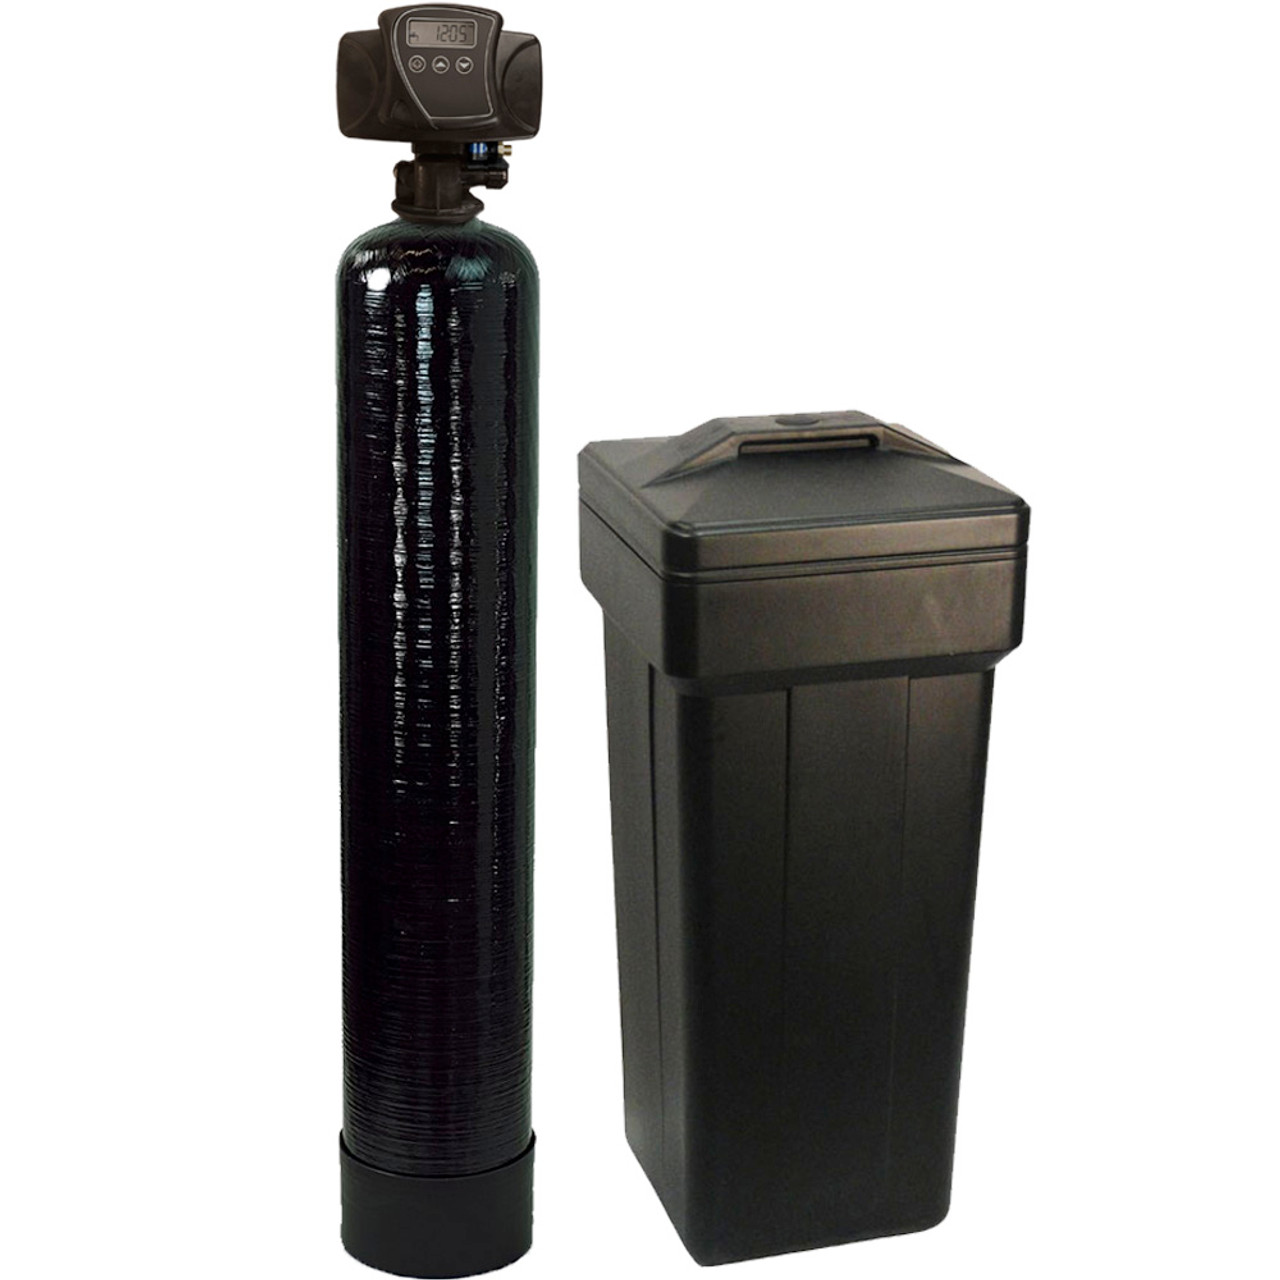 Durawater Mechanical Fleck 5600 Metered Water Softener With Usa Tanks Ships Loaded 64 000 Grains 8 Resin Watersbe Water Softener Softener Water Heater